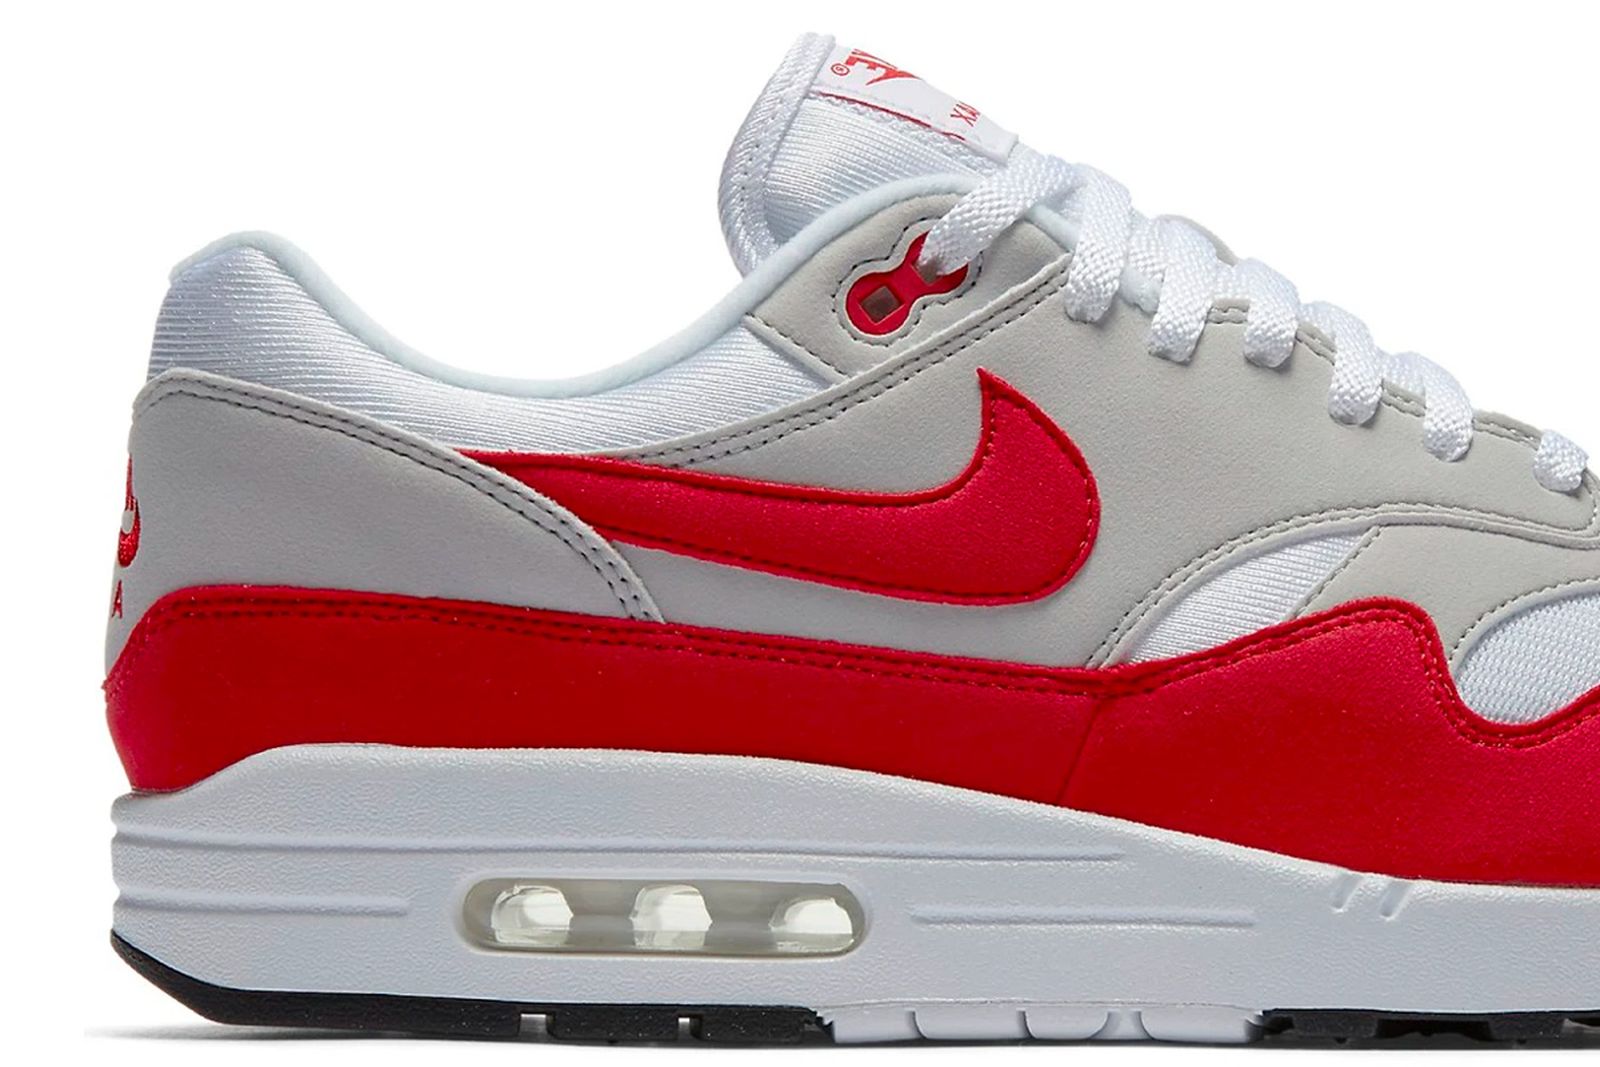 11 of the Best Nike Air Max 1 Colorways to Wear in 2021 مكونات العظام